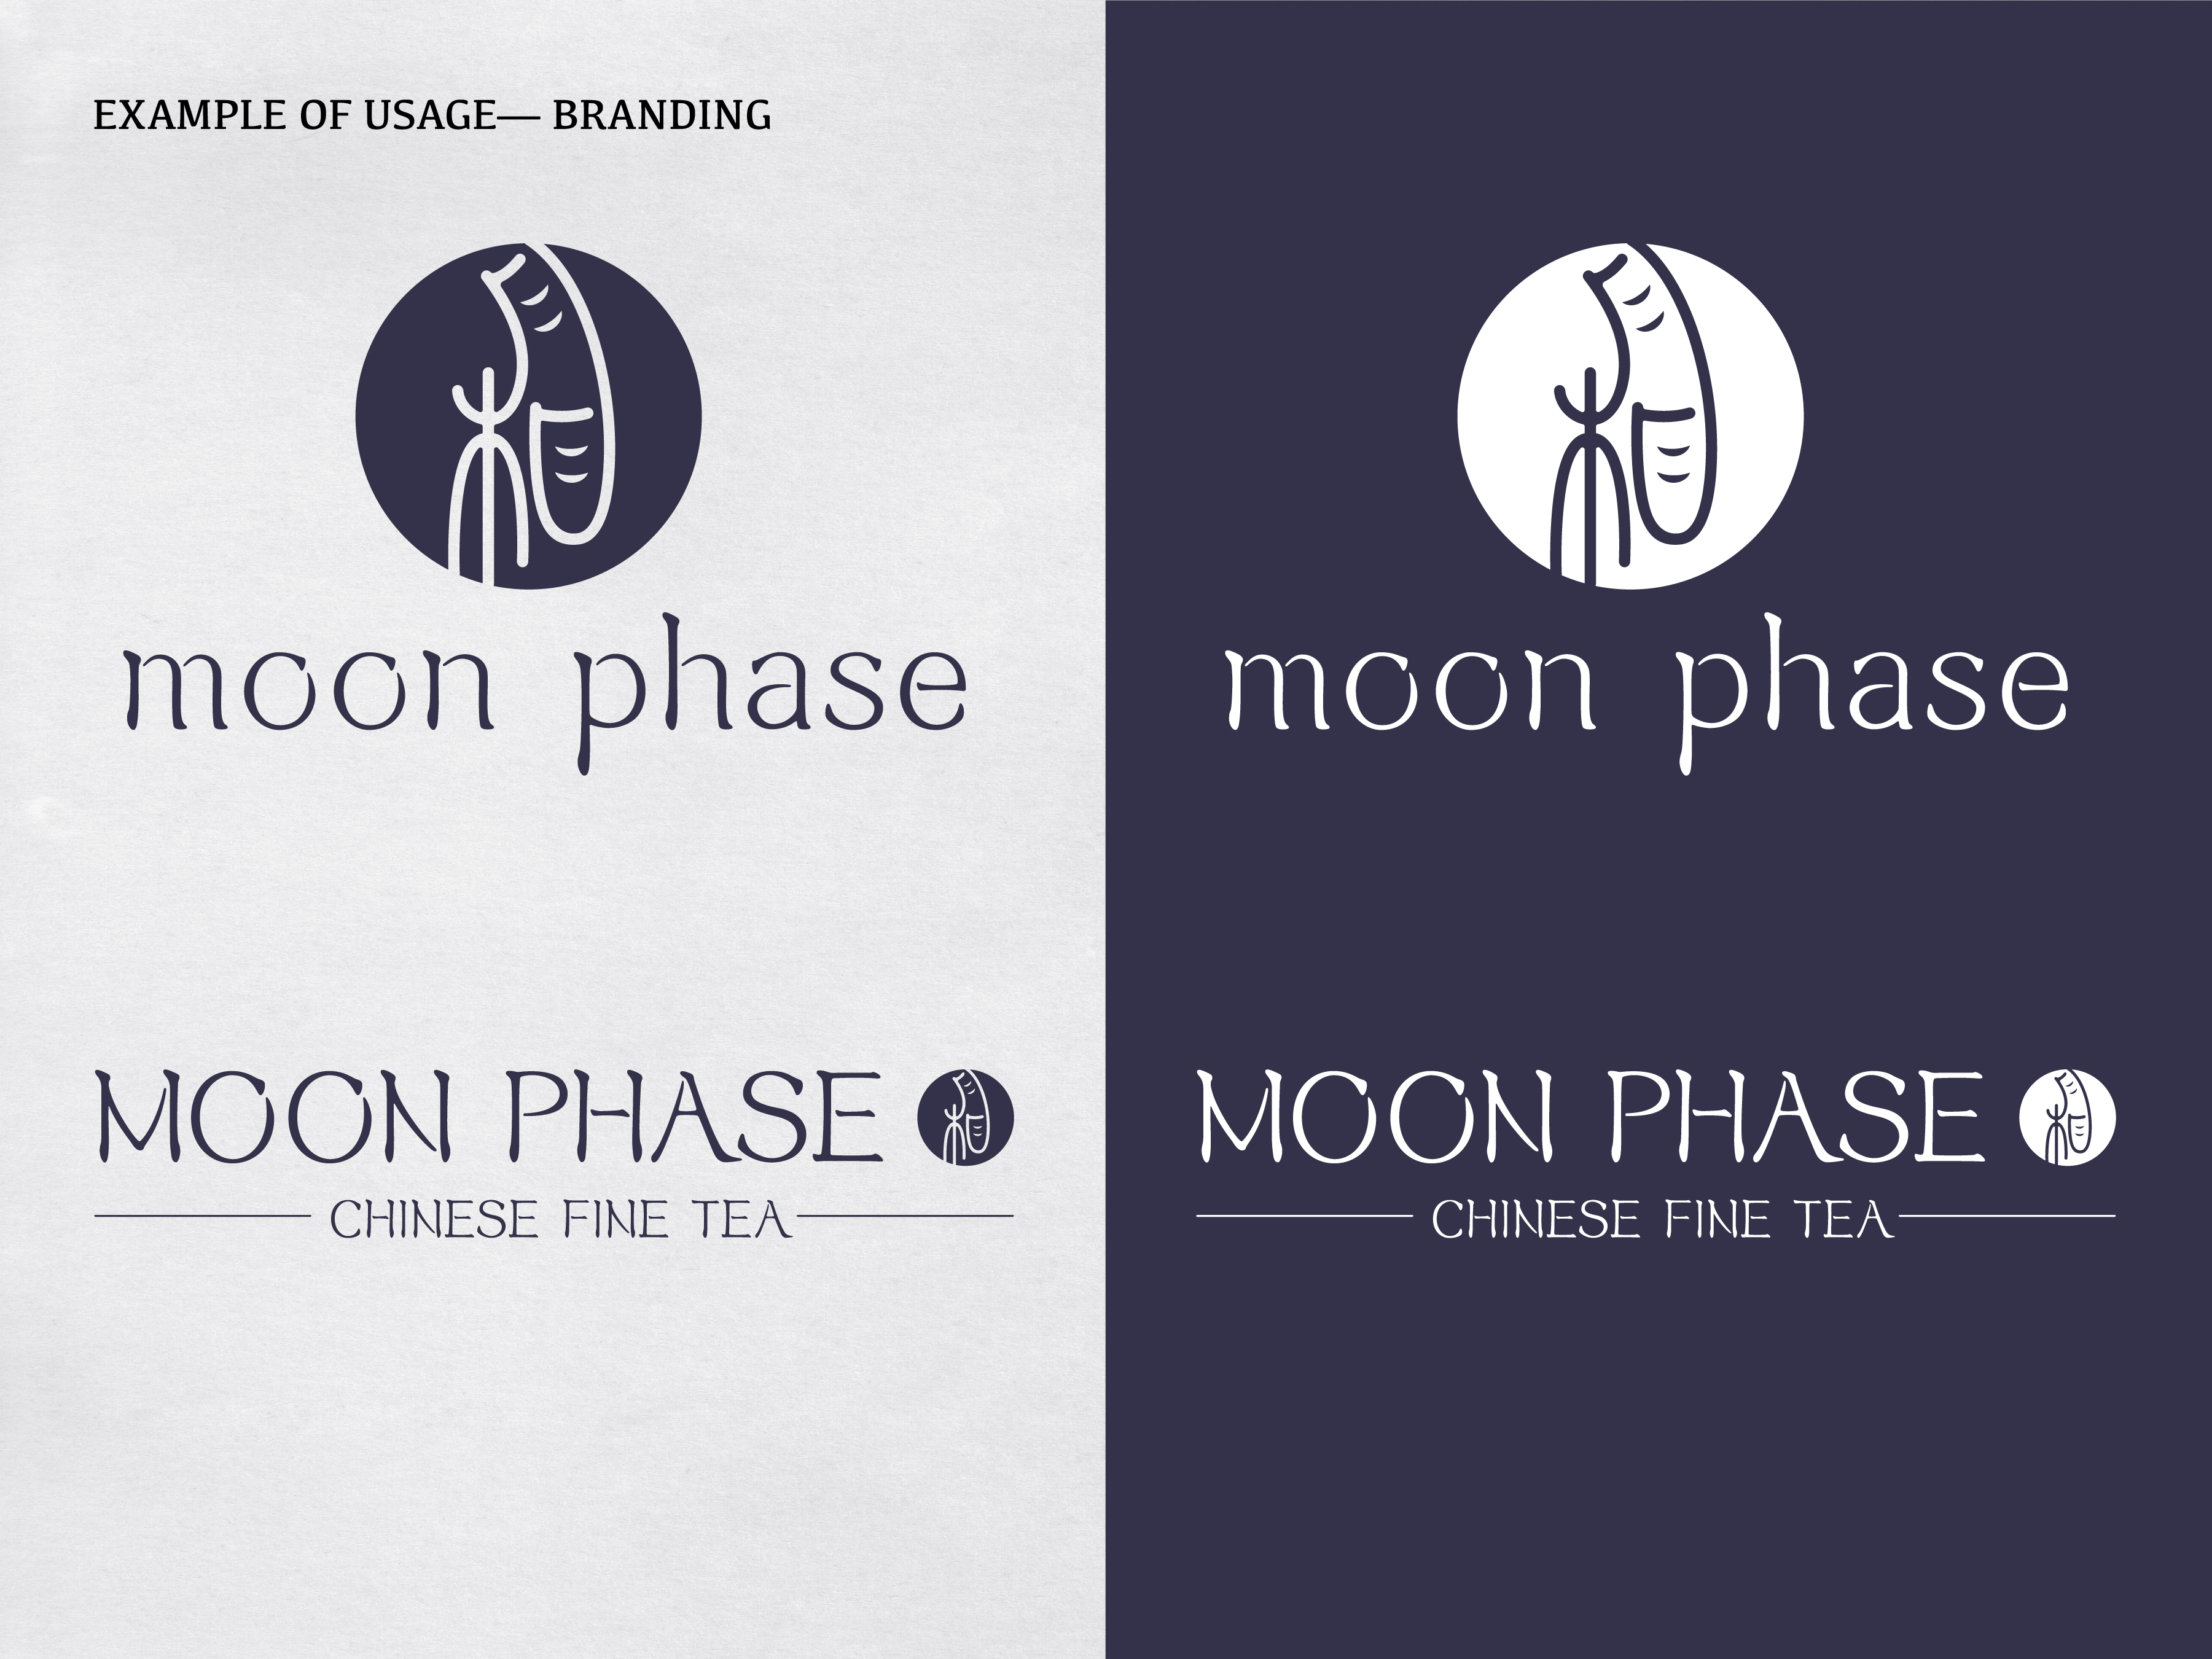 Orienty: A Chinese inspired English Typeface